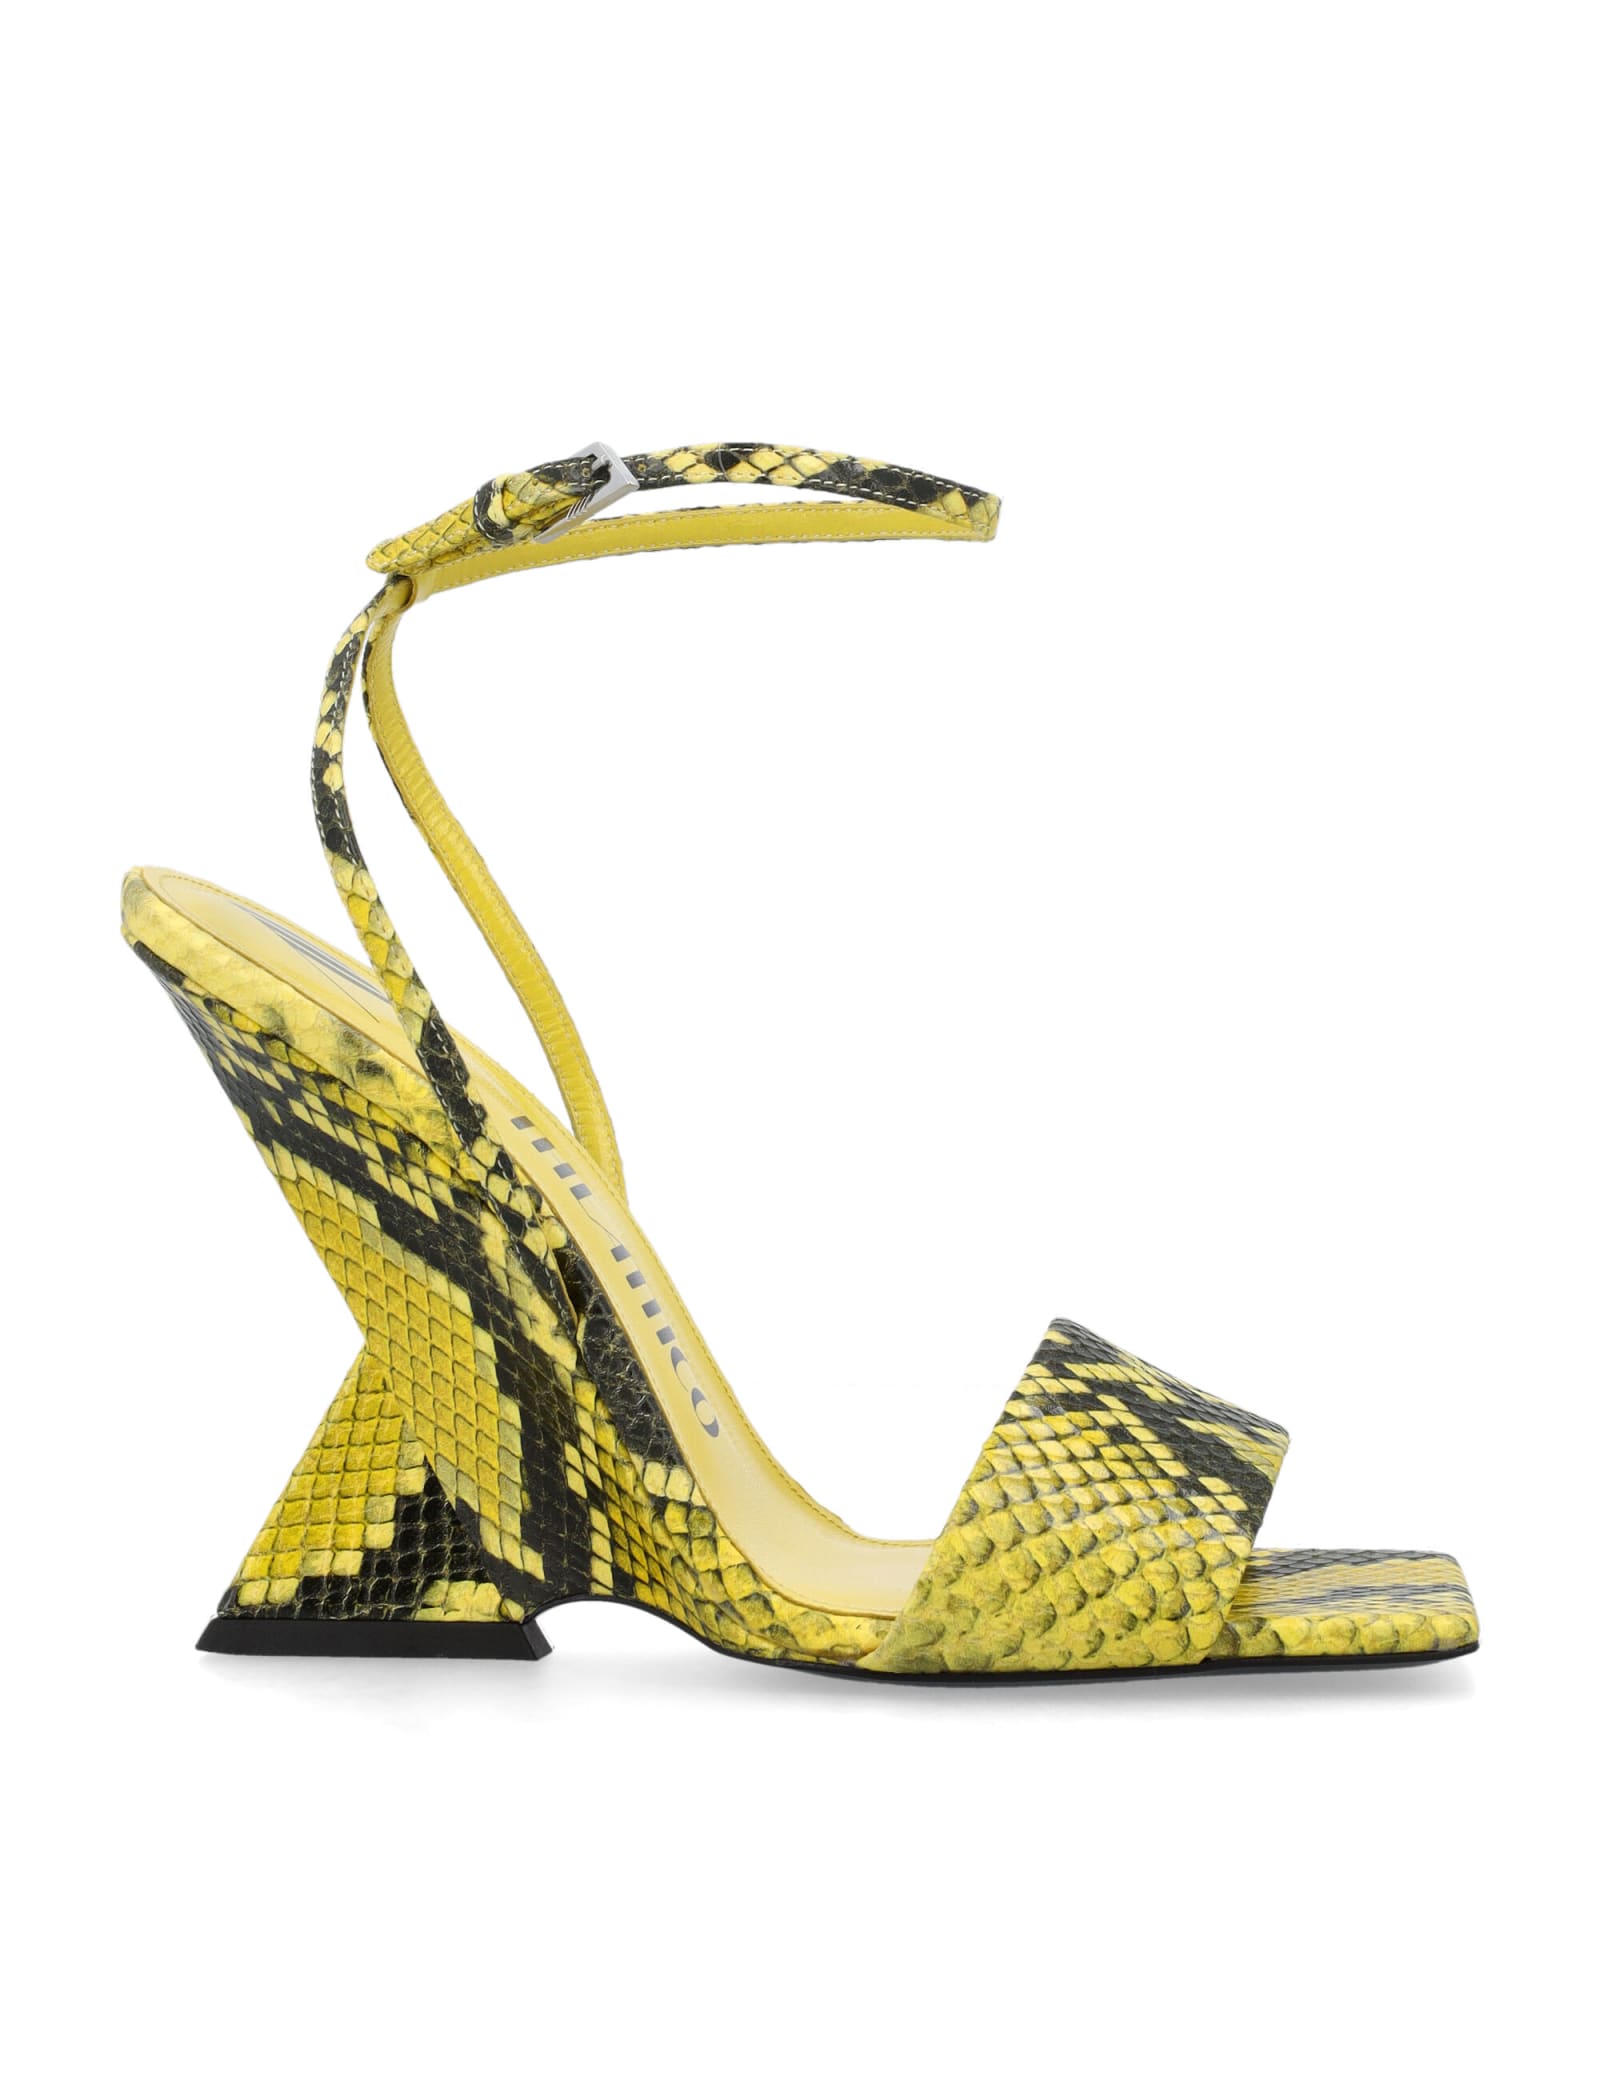 Cheope Fluo Yellow Sandal